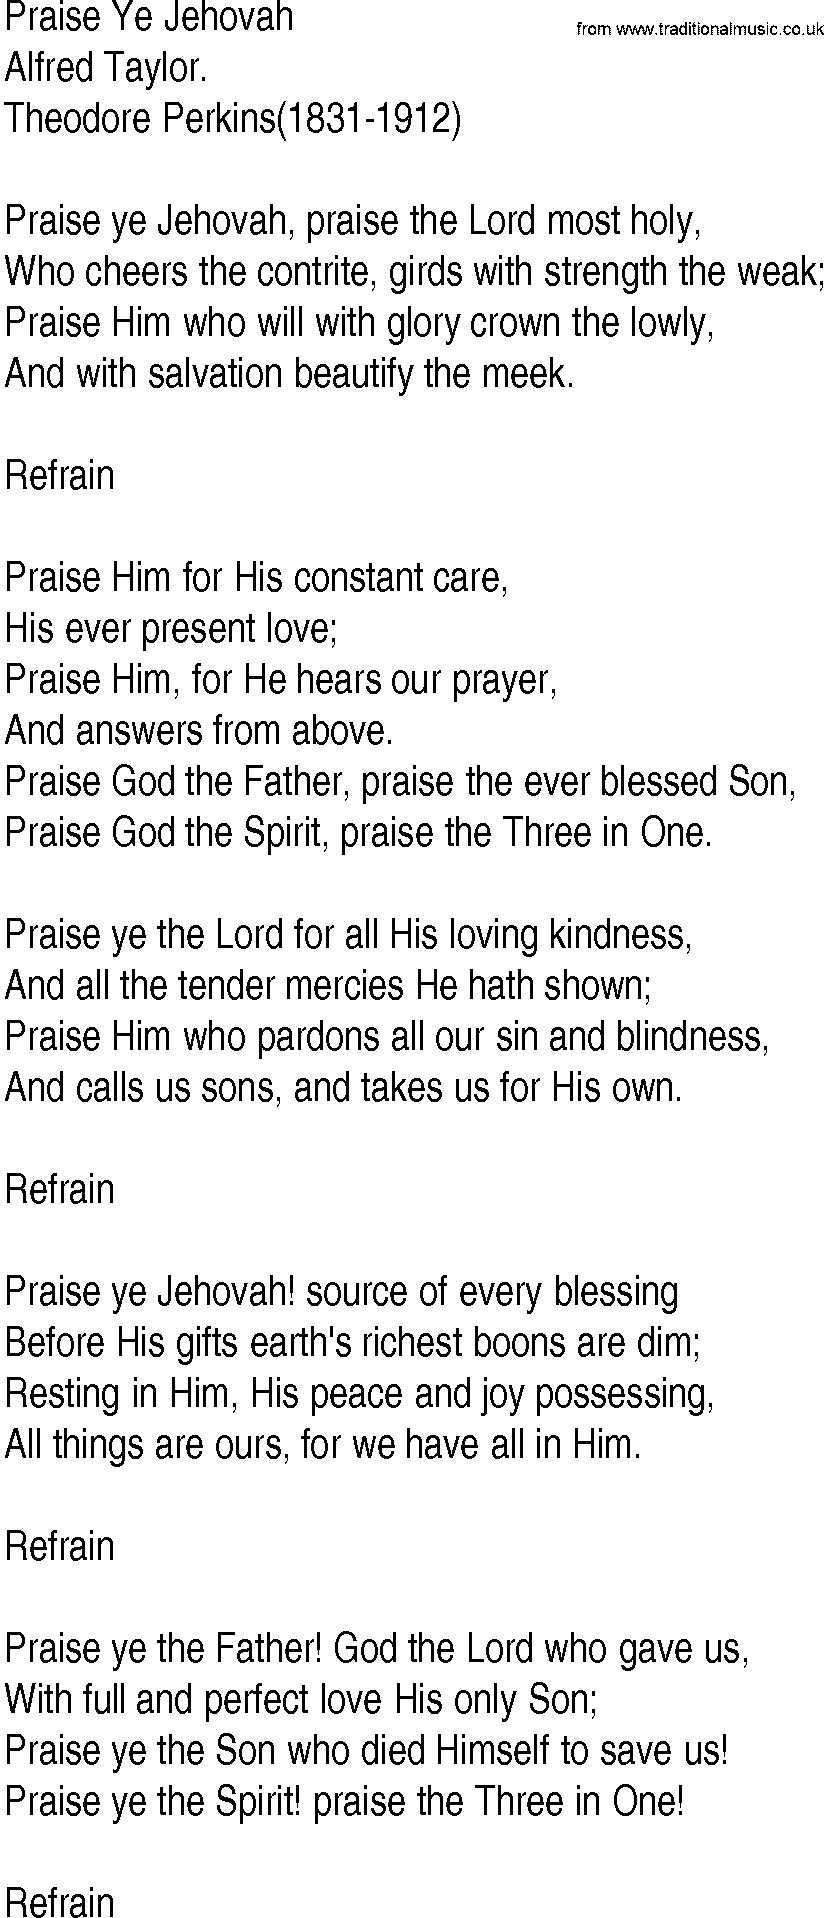 Hymn and Gospel Song: Praise Ye Jehovah by Alfred Taylor lyrics